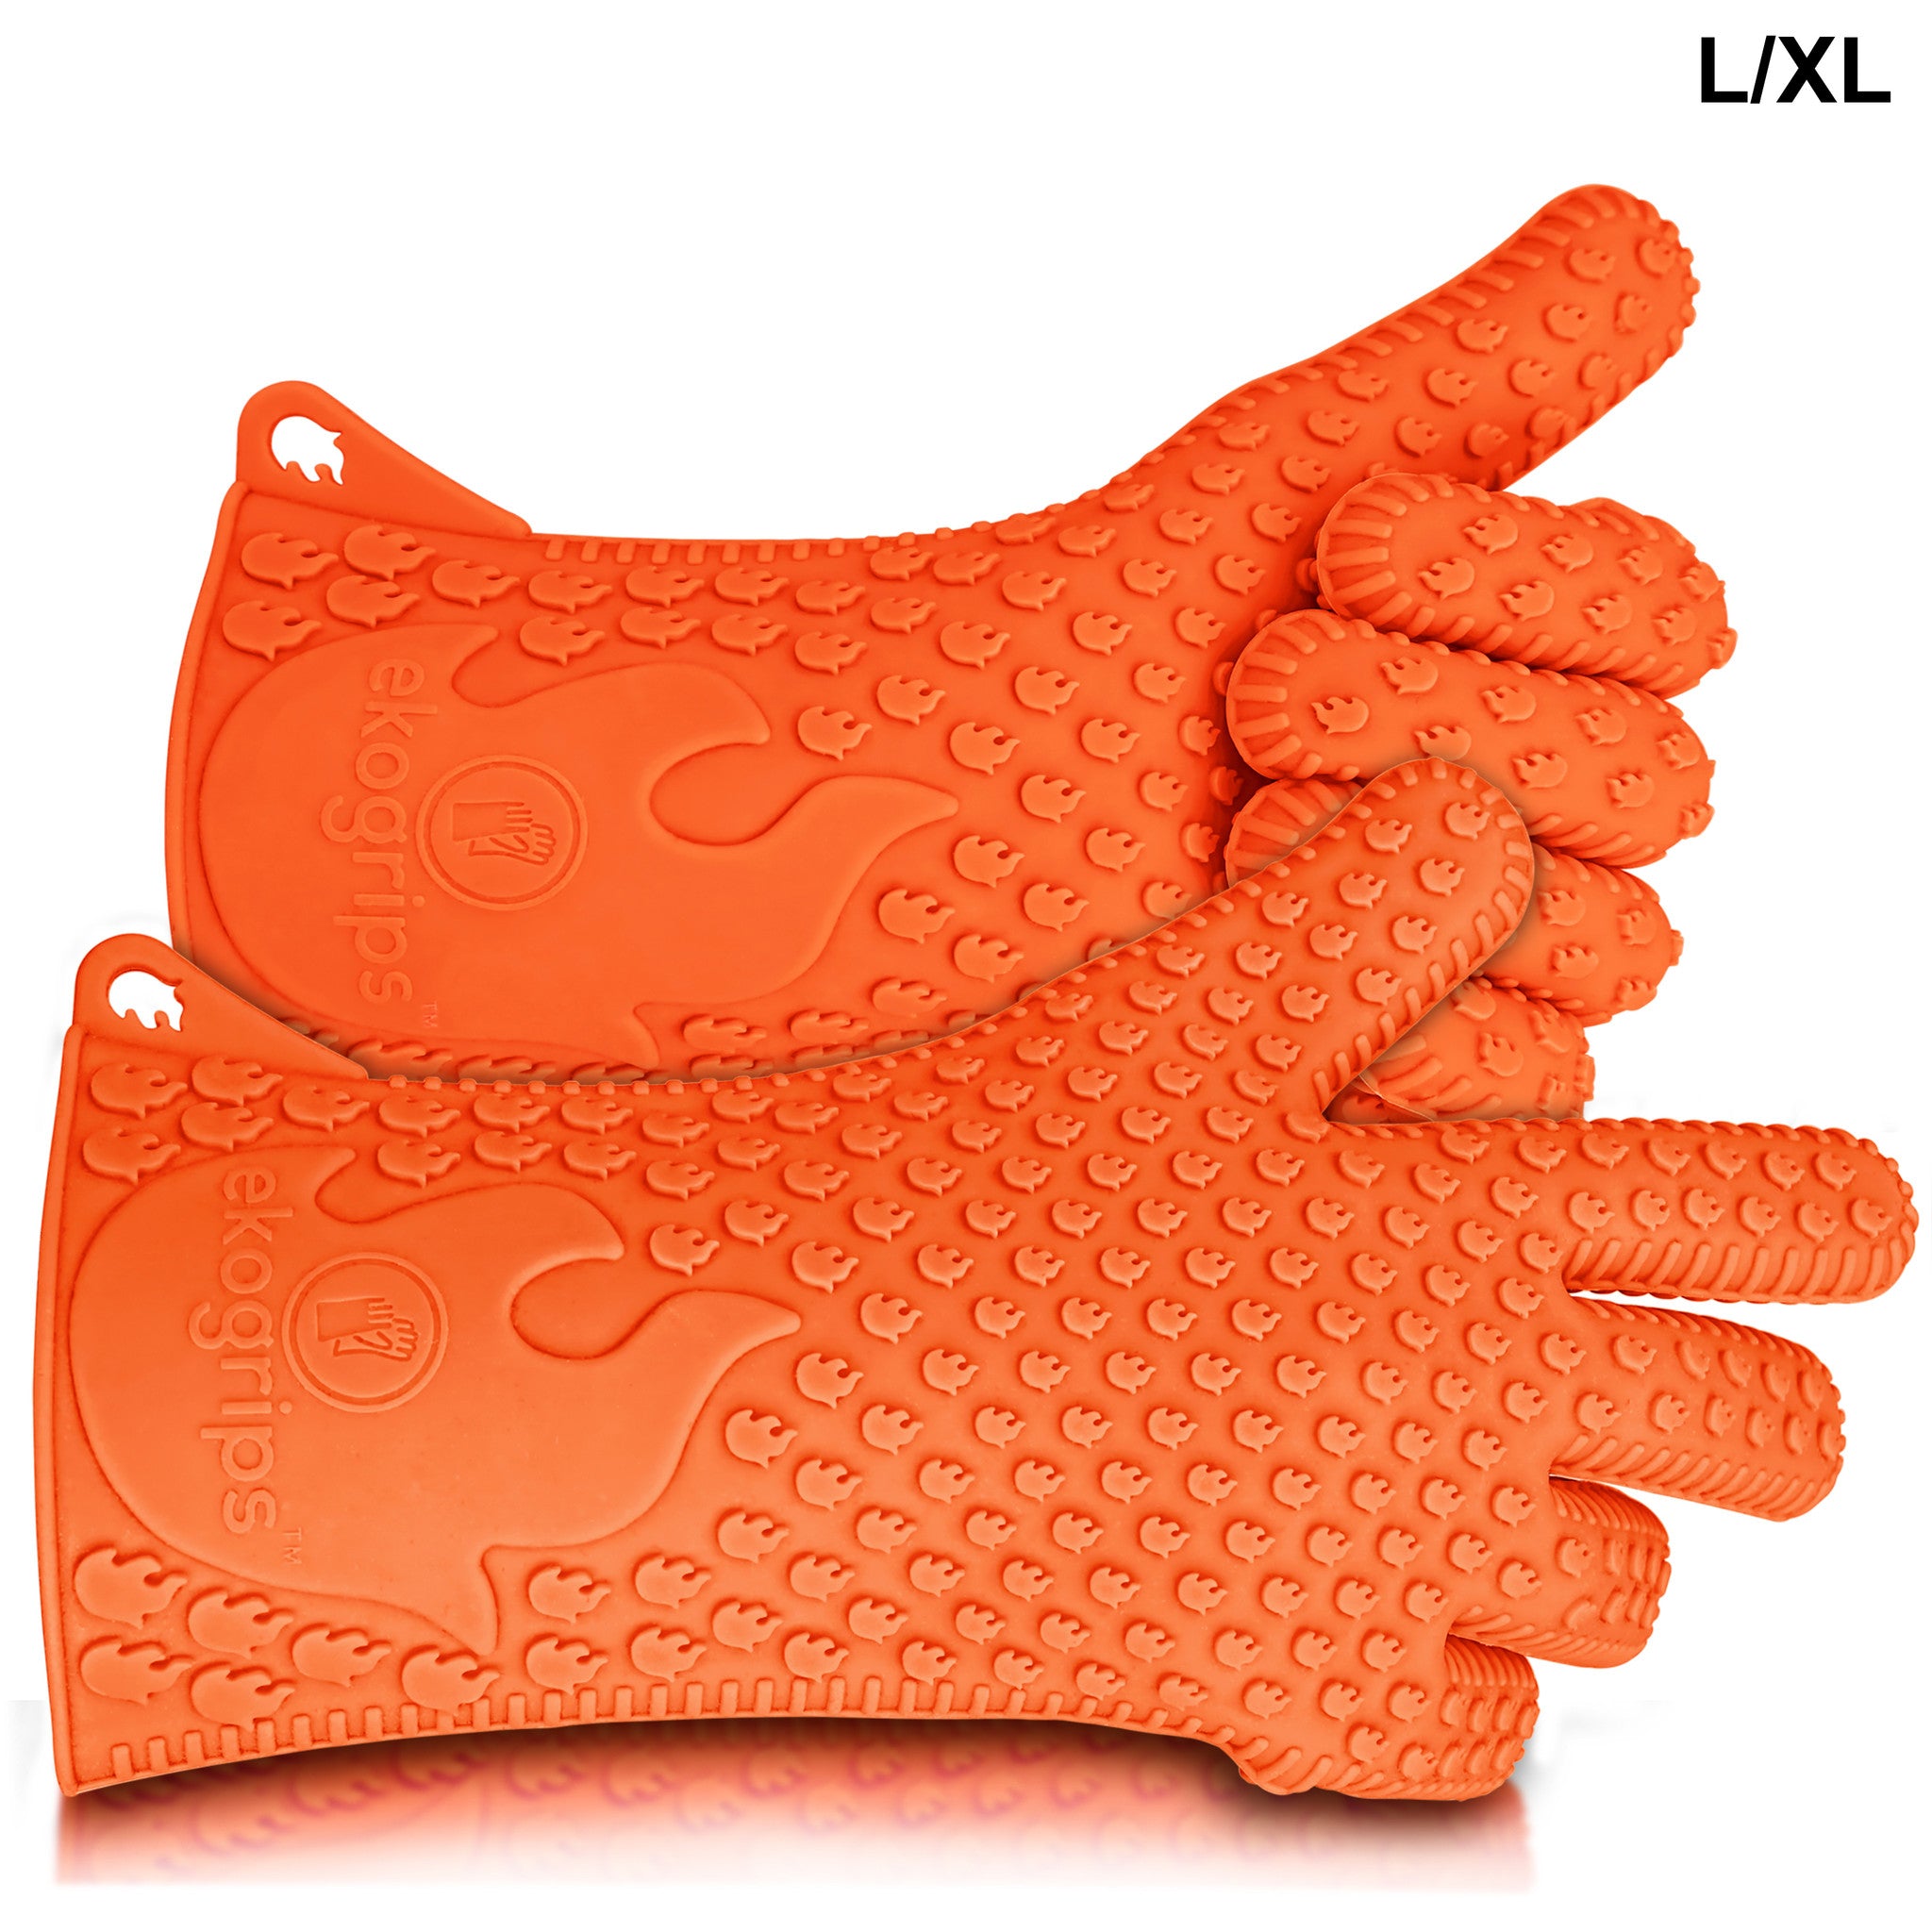 best bbq gloves silicone size xl and xxl amazon's choice